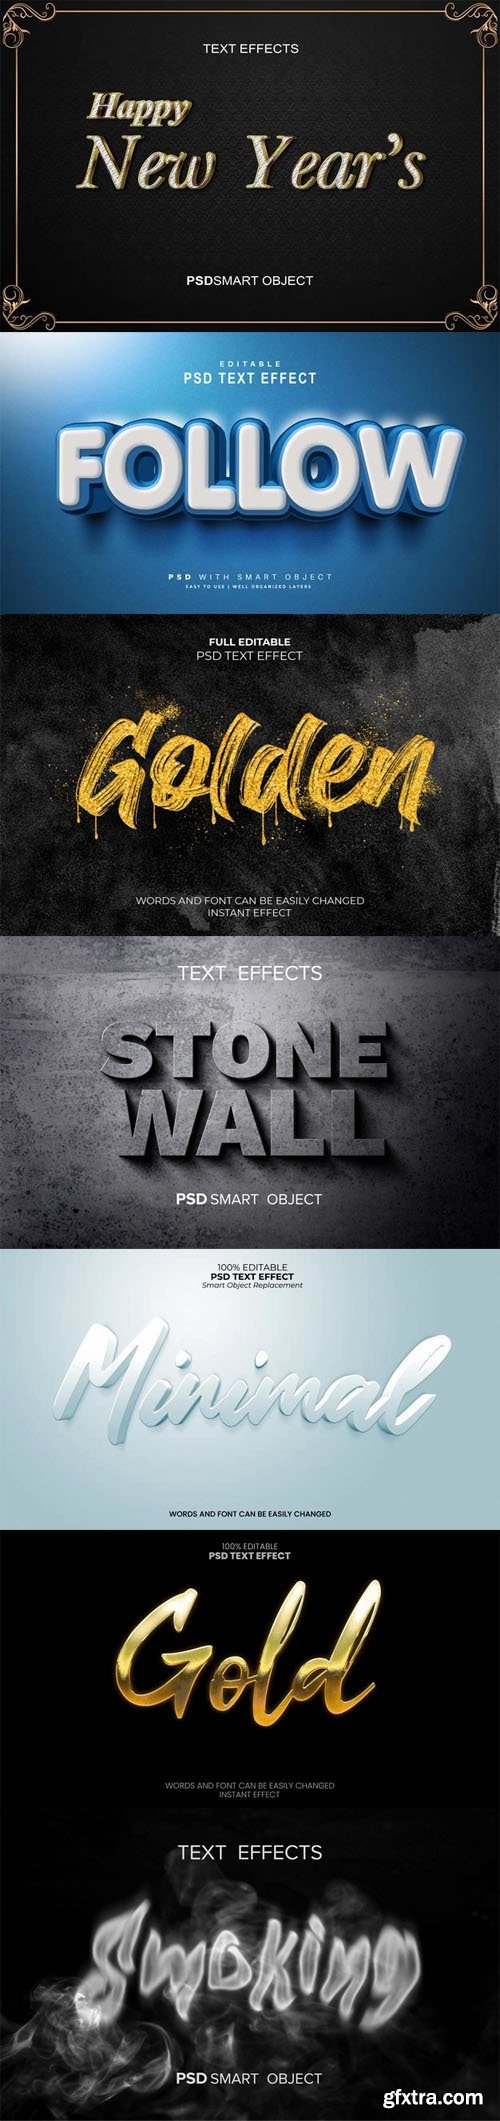 10+ Modern Creative Text Effect Templates for Photoshop